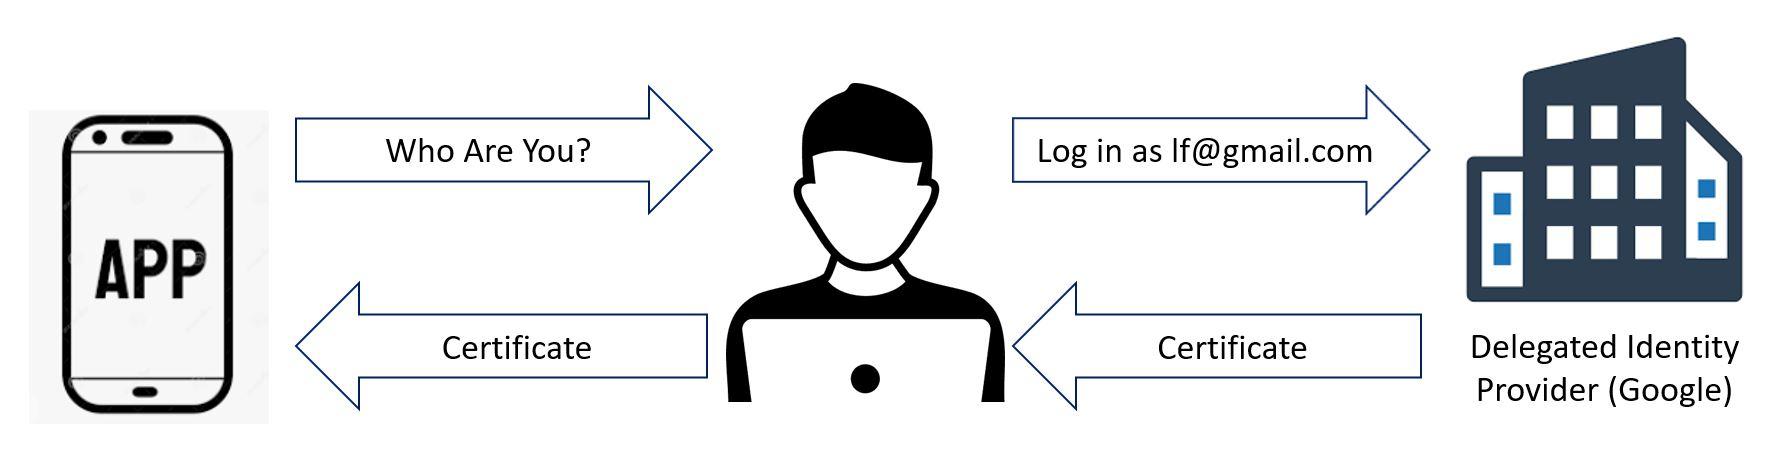 How to Store Login Data in a Database